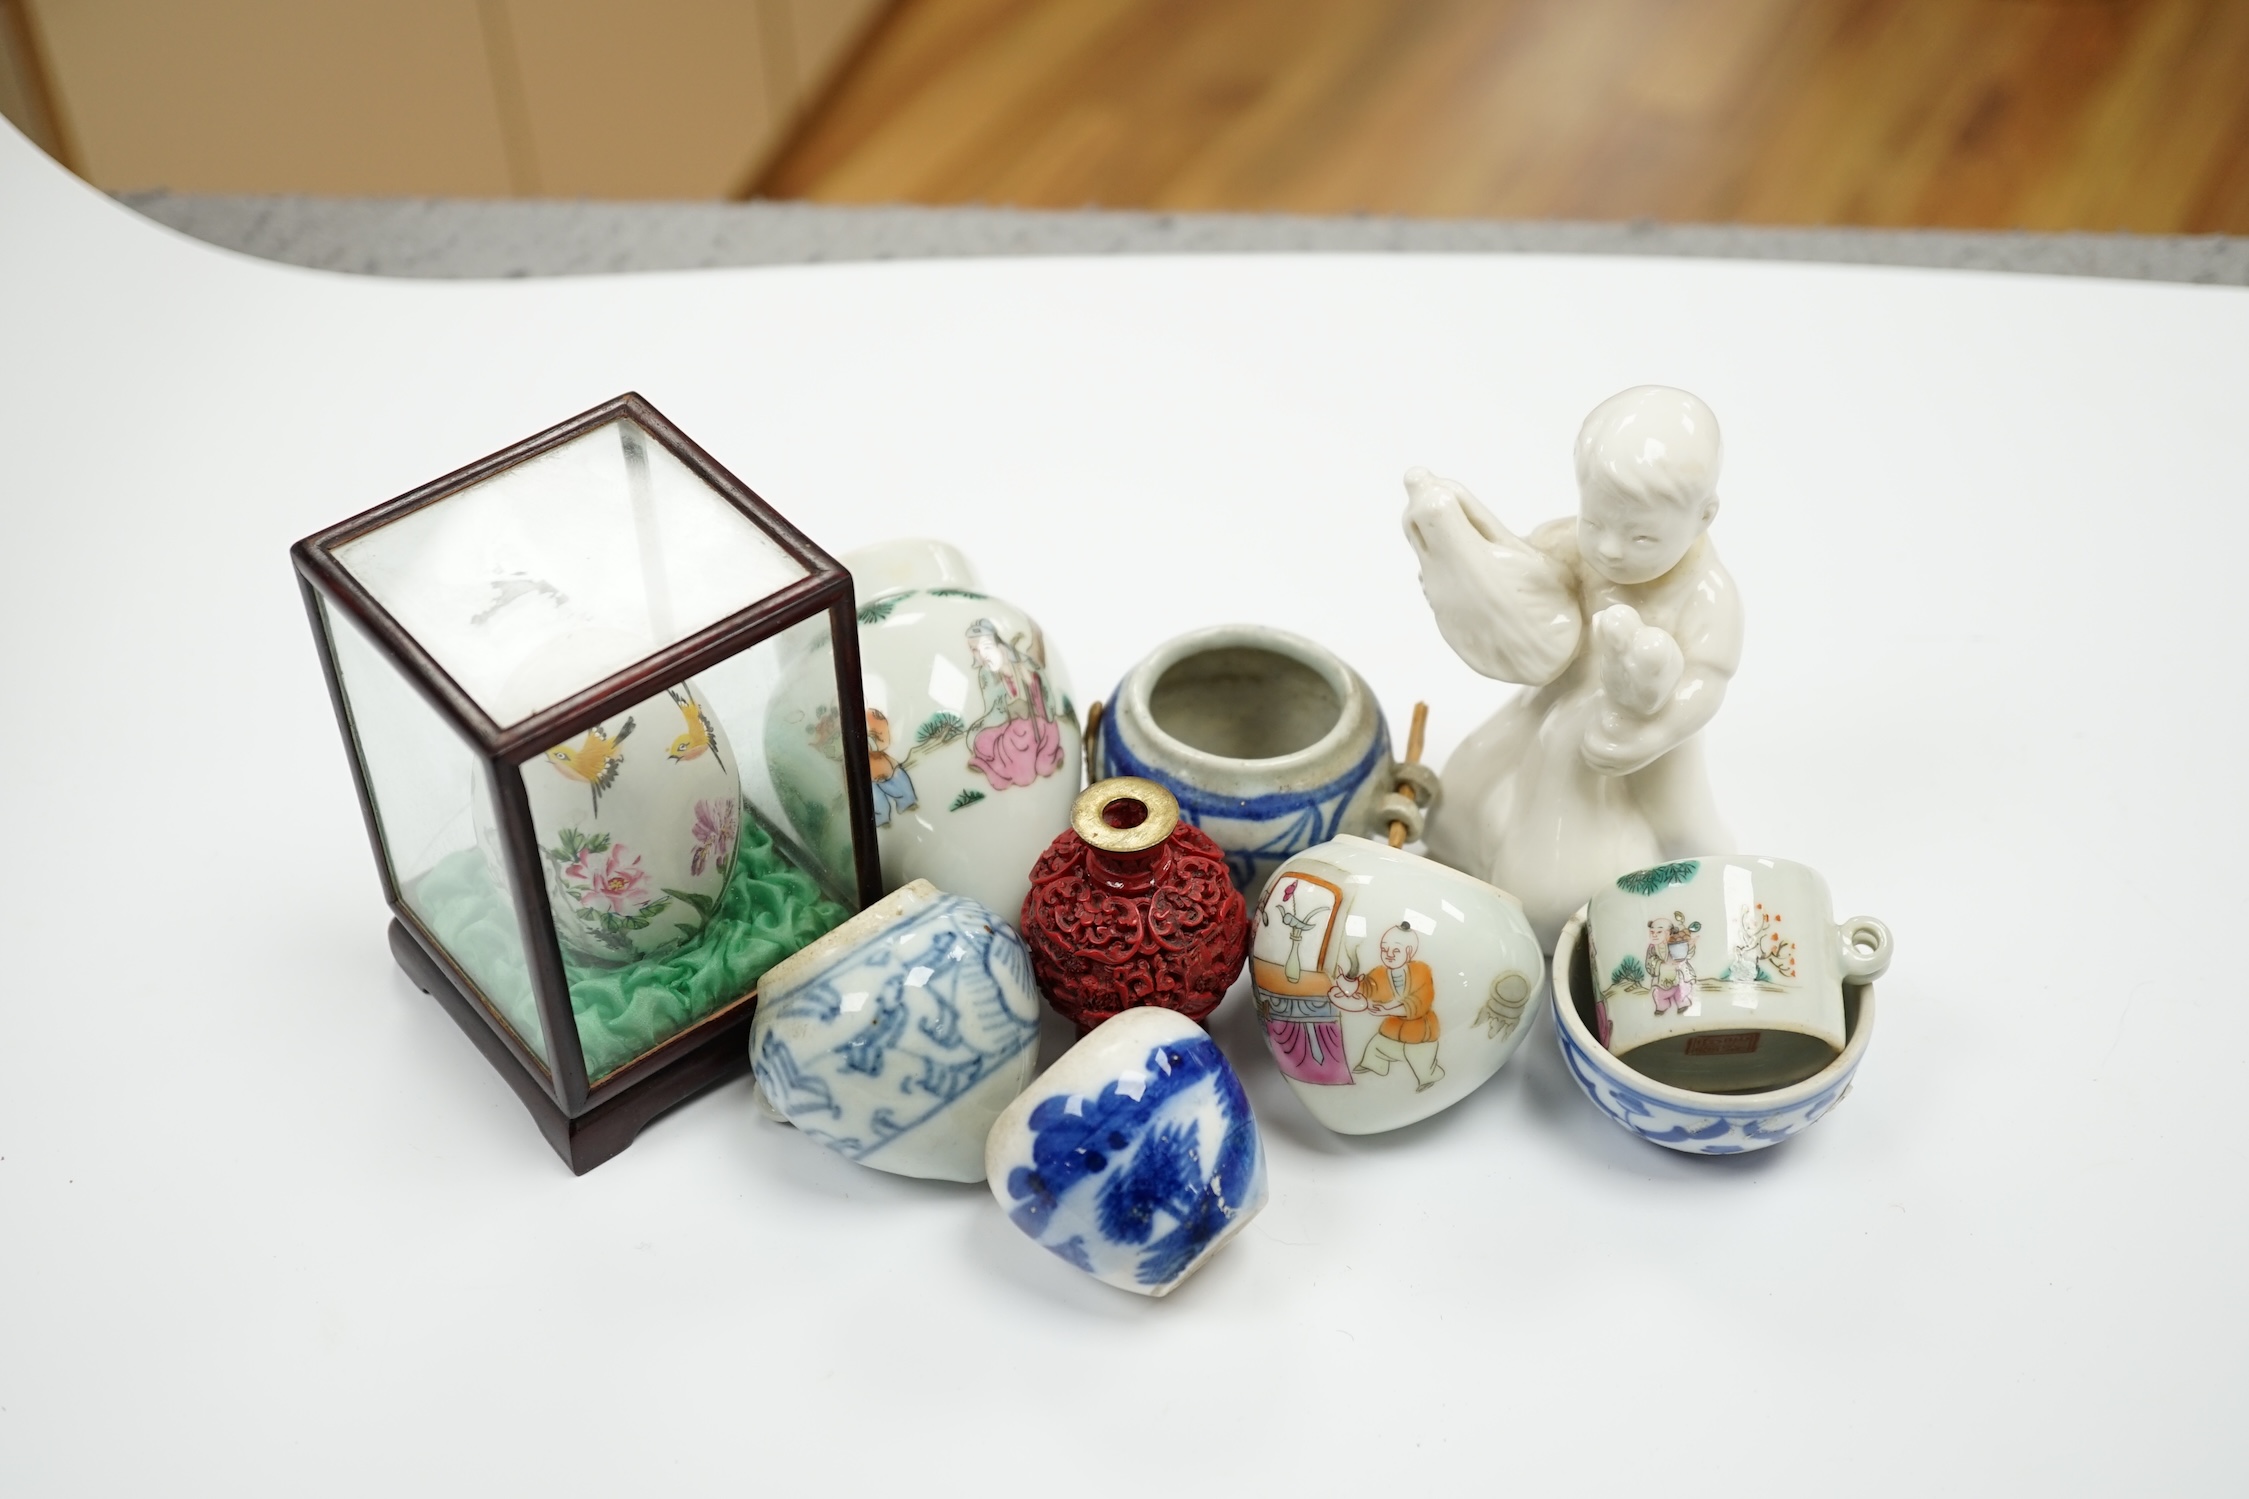 A group of small Chinese bowls, a blanc de chine figure, a cinnabar lacquer miniature vase, etc. - Image 2 of 5